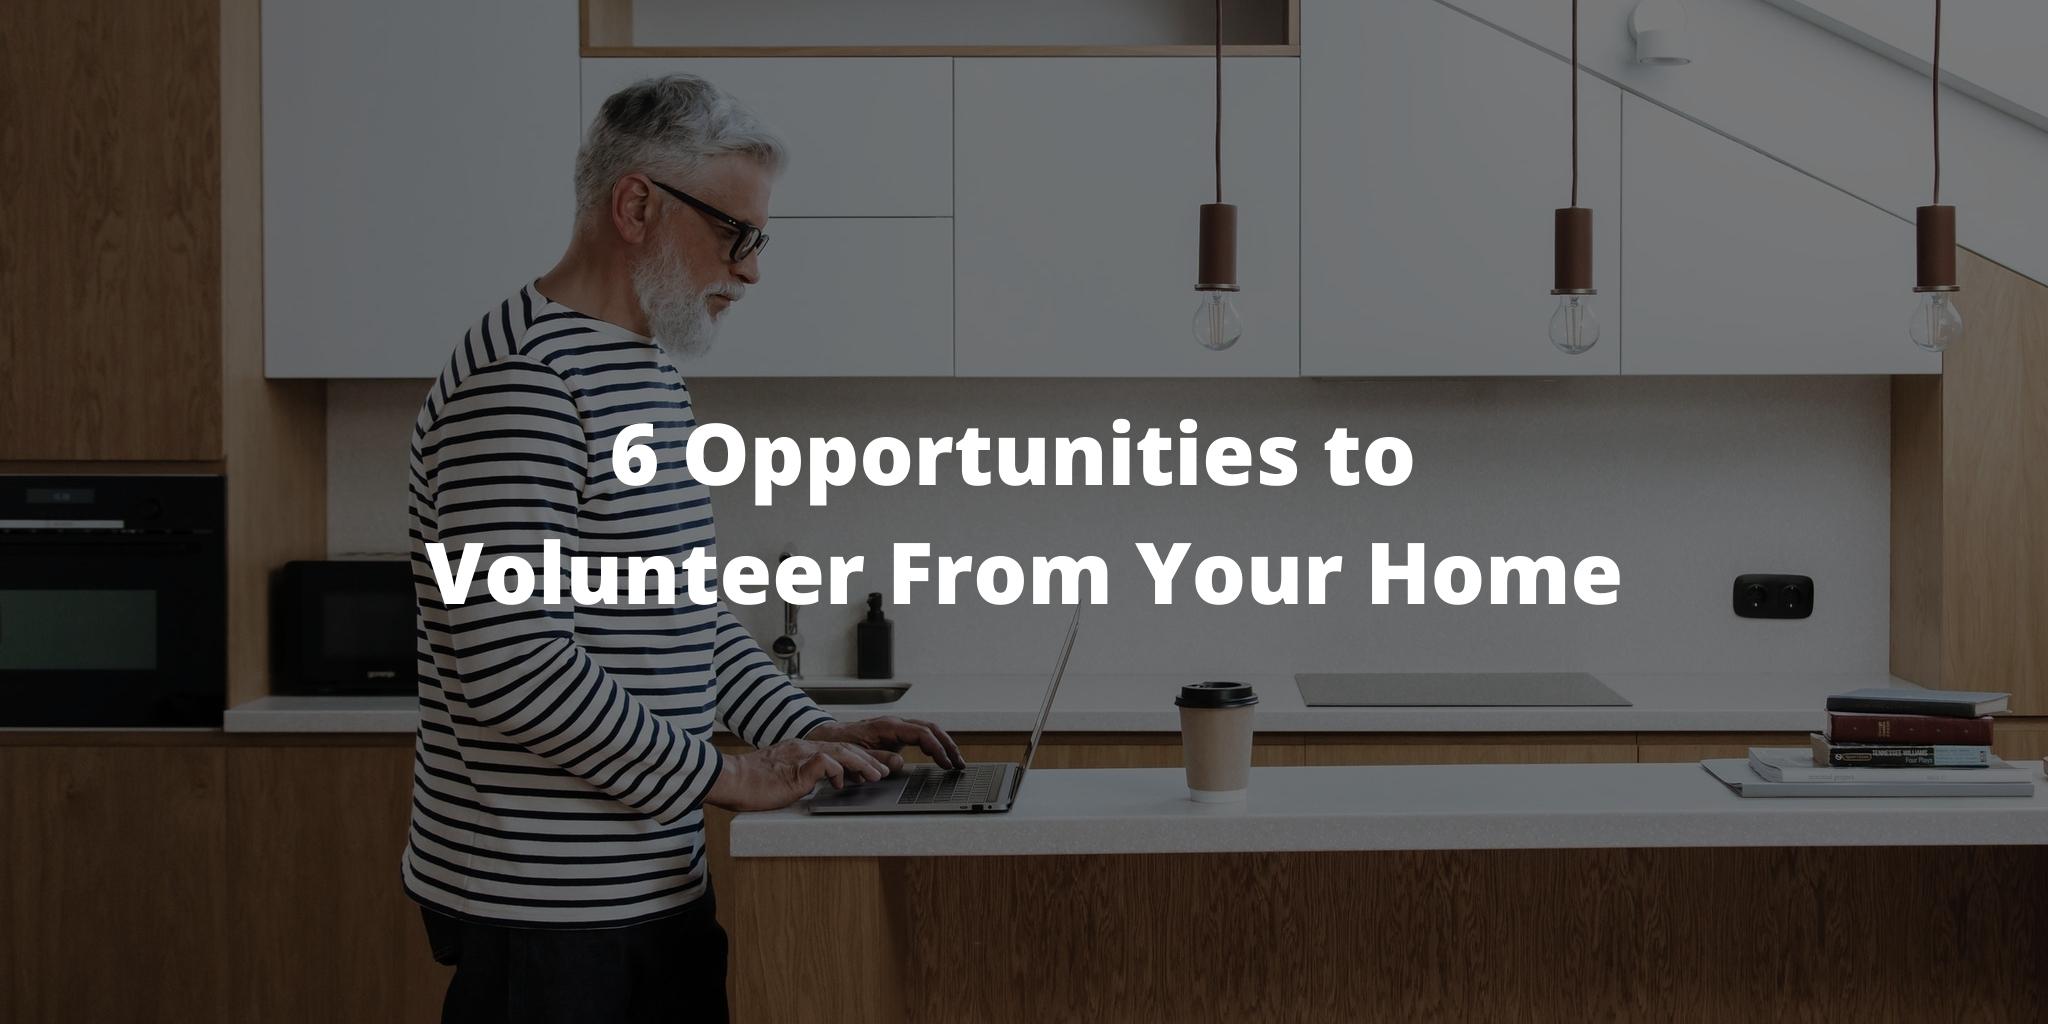 6 Opportunities to Volunteer From Your Home